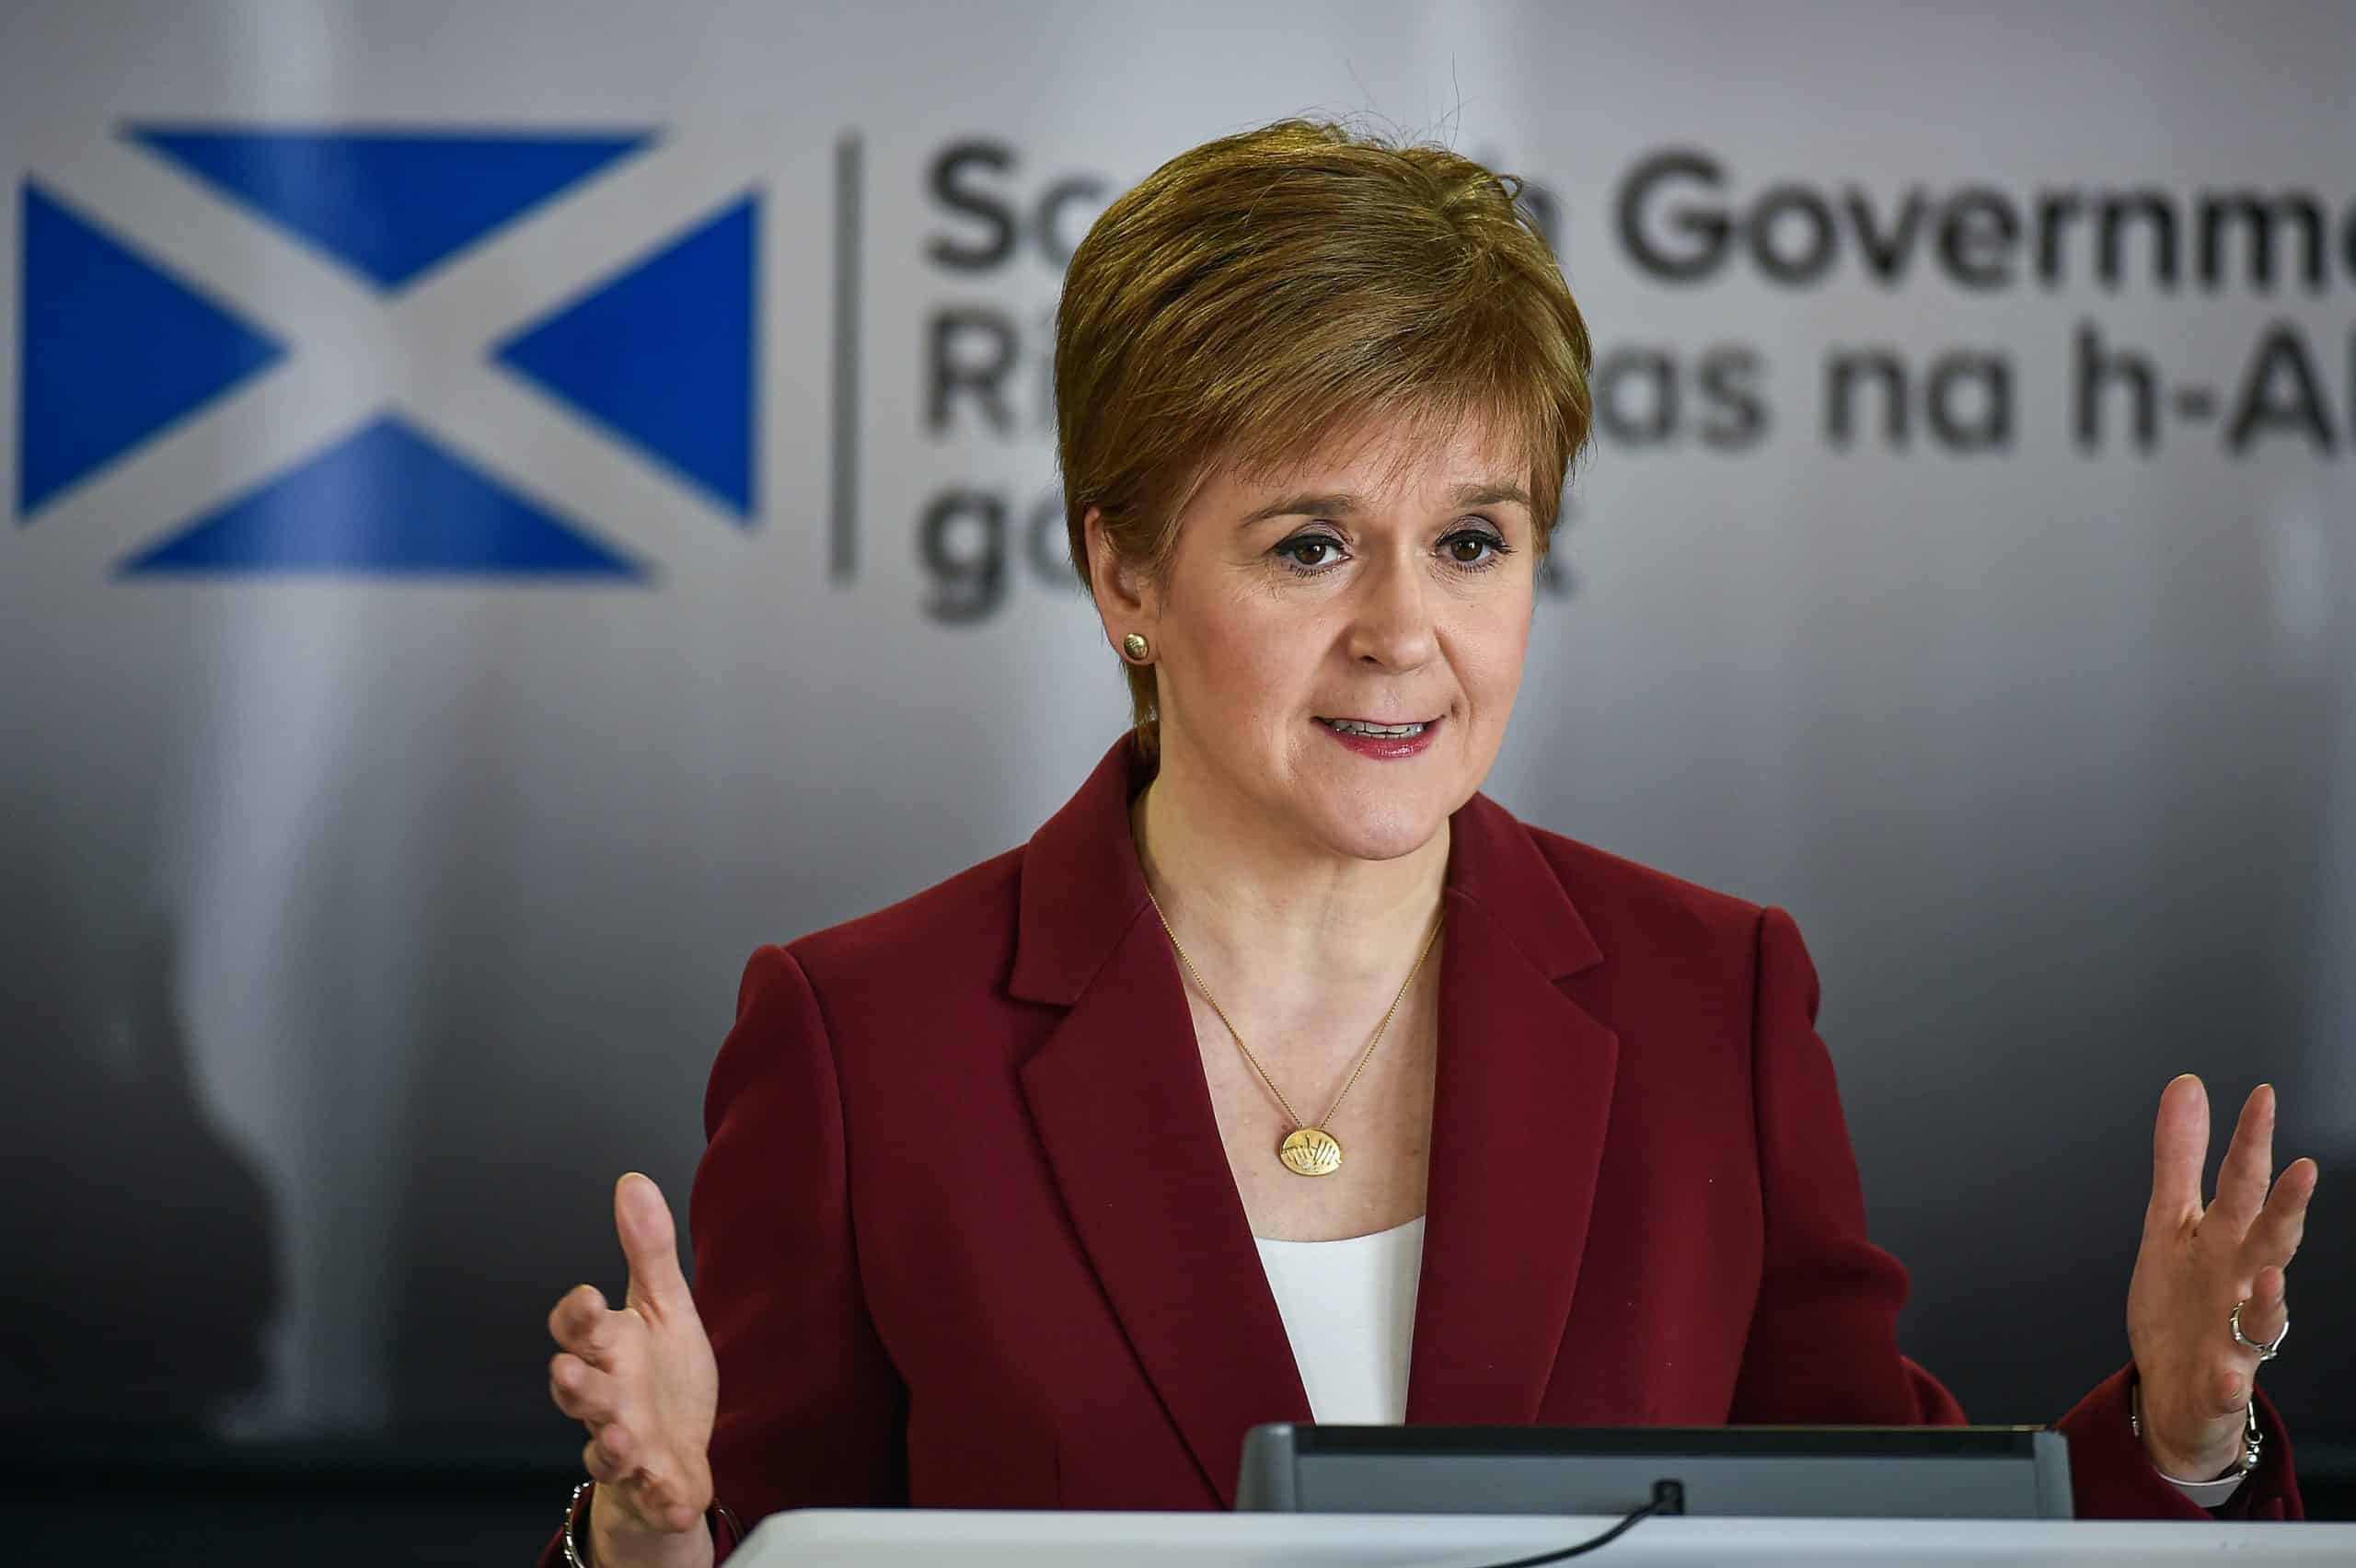 Hard Scottish border: Sturgeon sends in extra police to keep out English